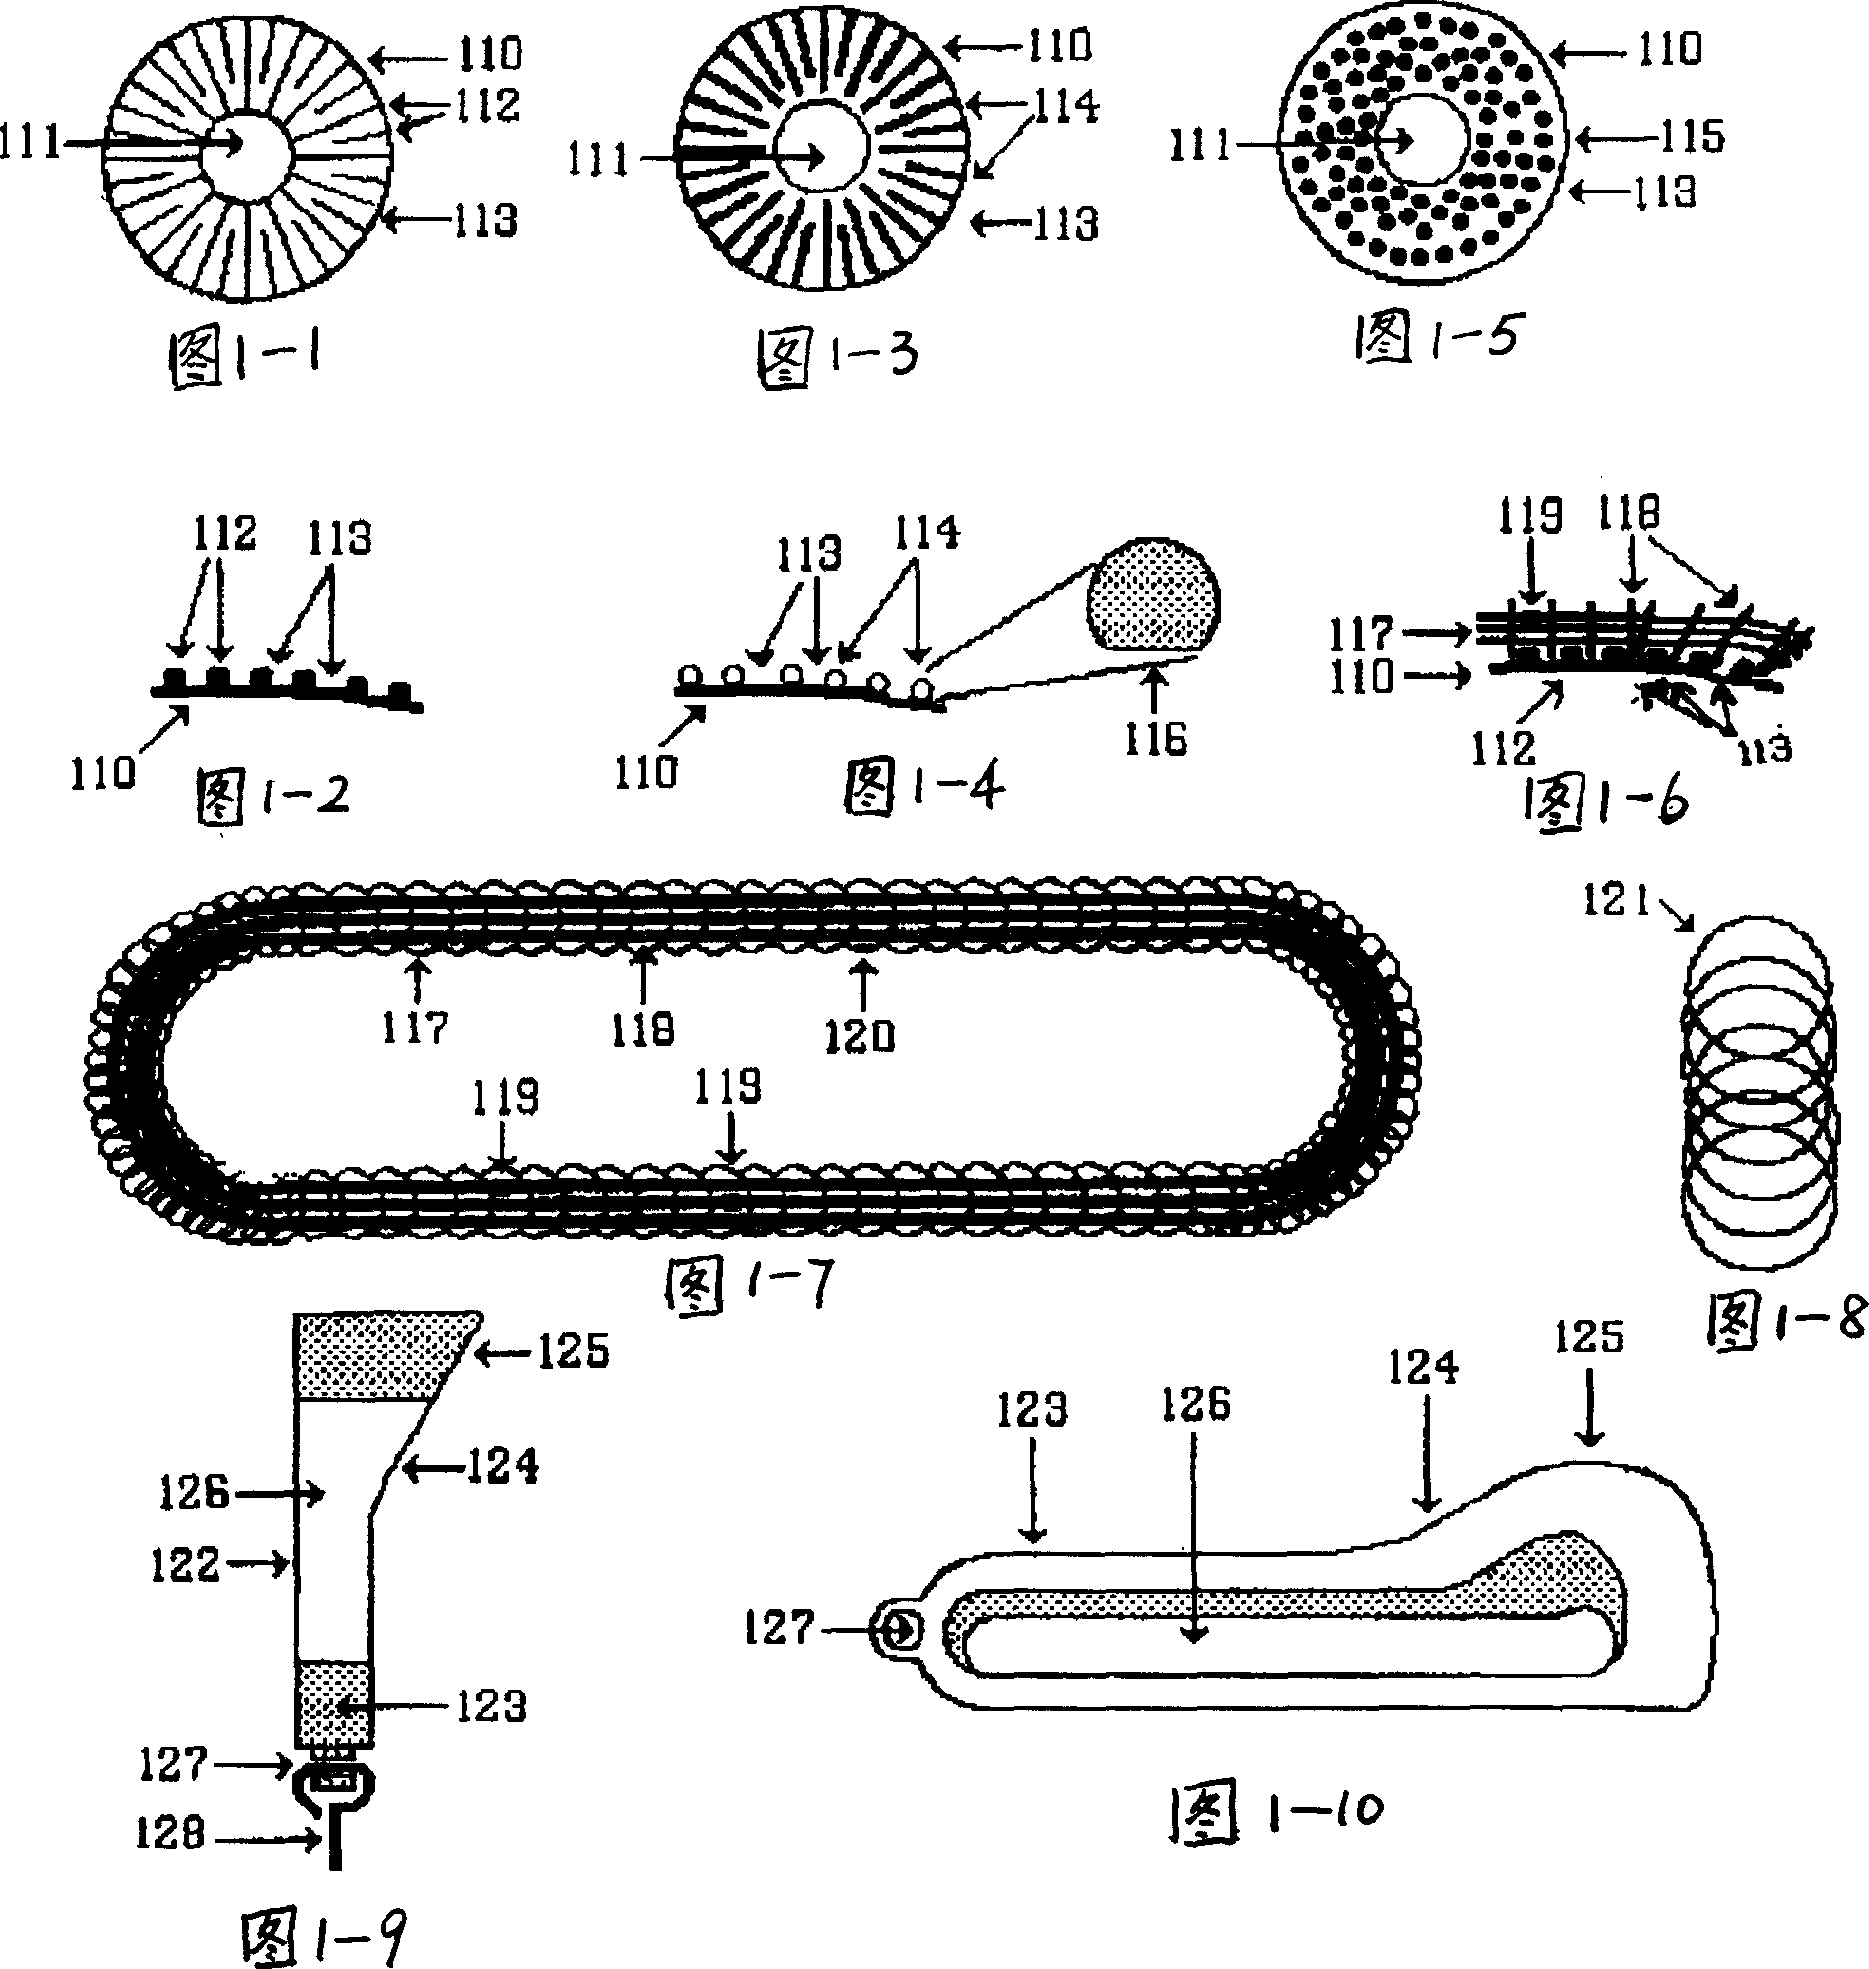 Gearing chain ring and its application in speed variator